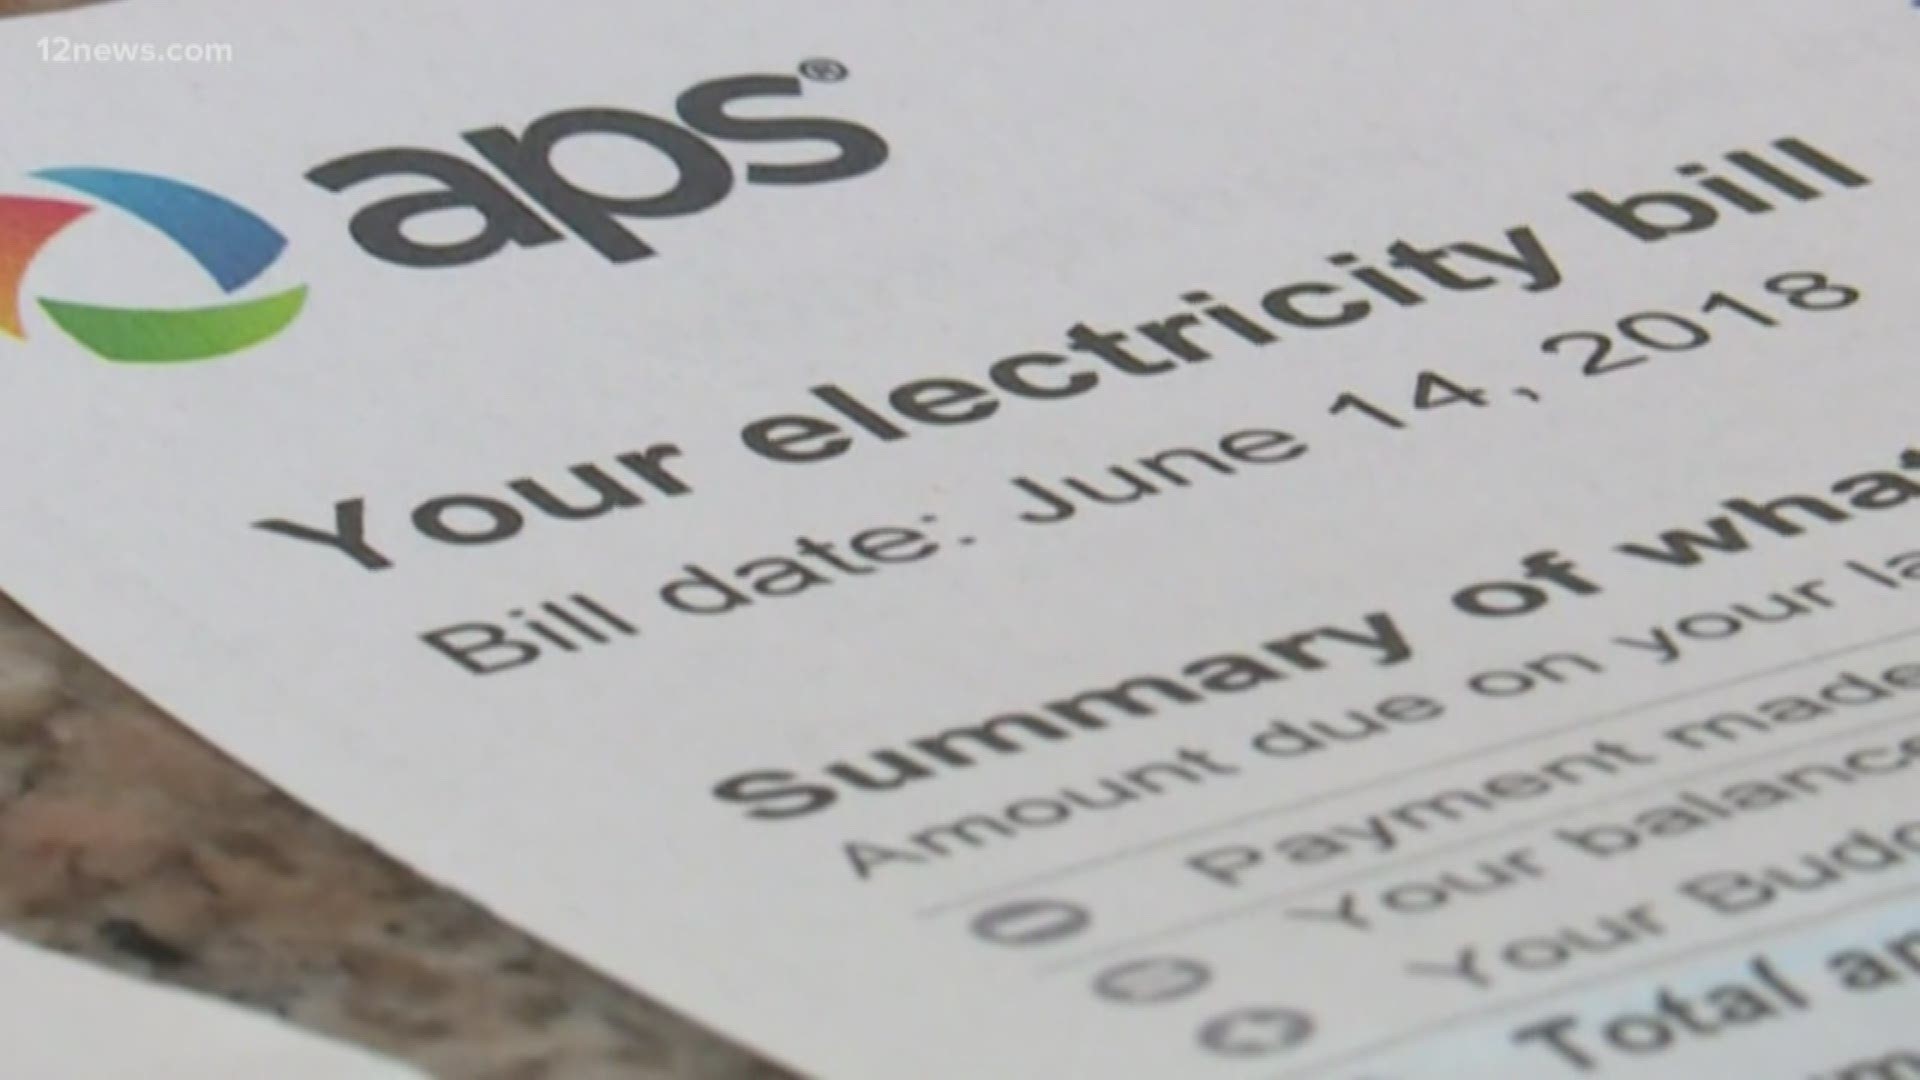 The high heat and working from home has a lot of people worried about their electric bills, but there are some ways to save money